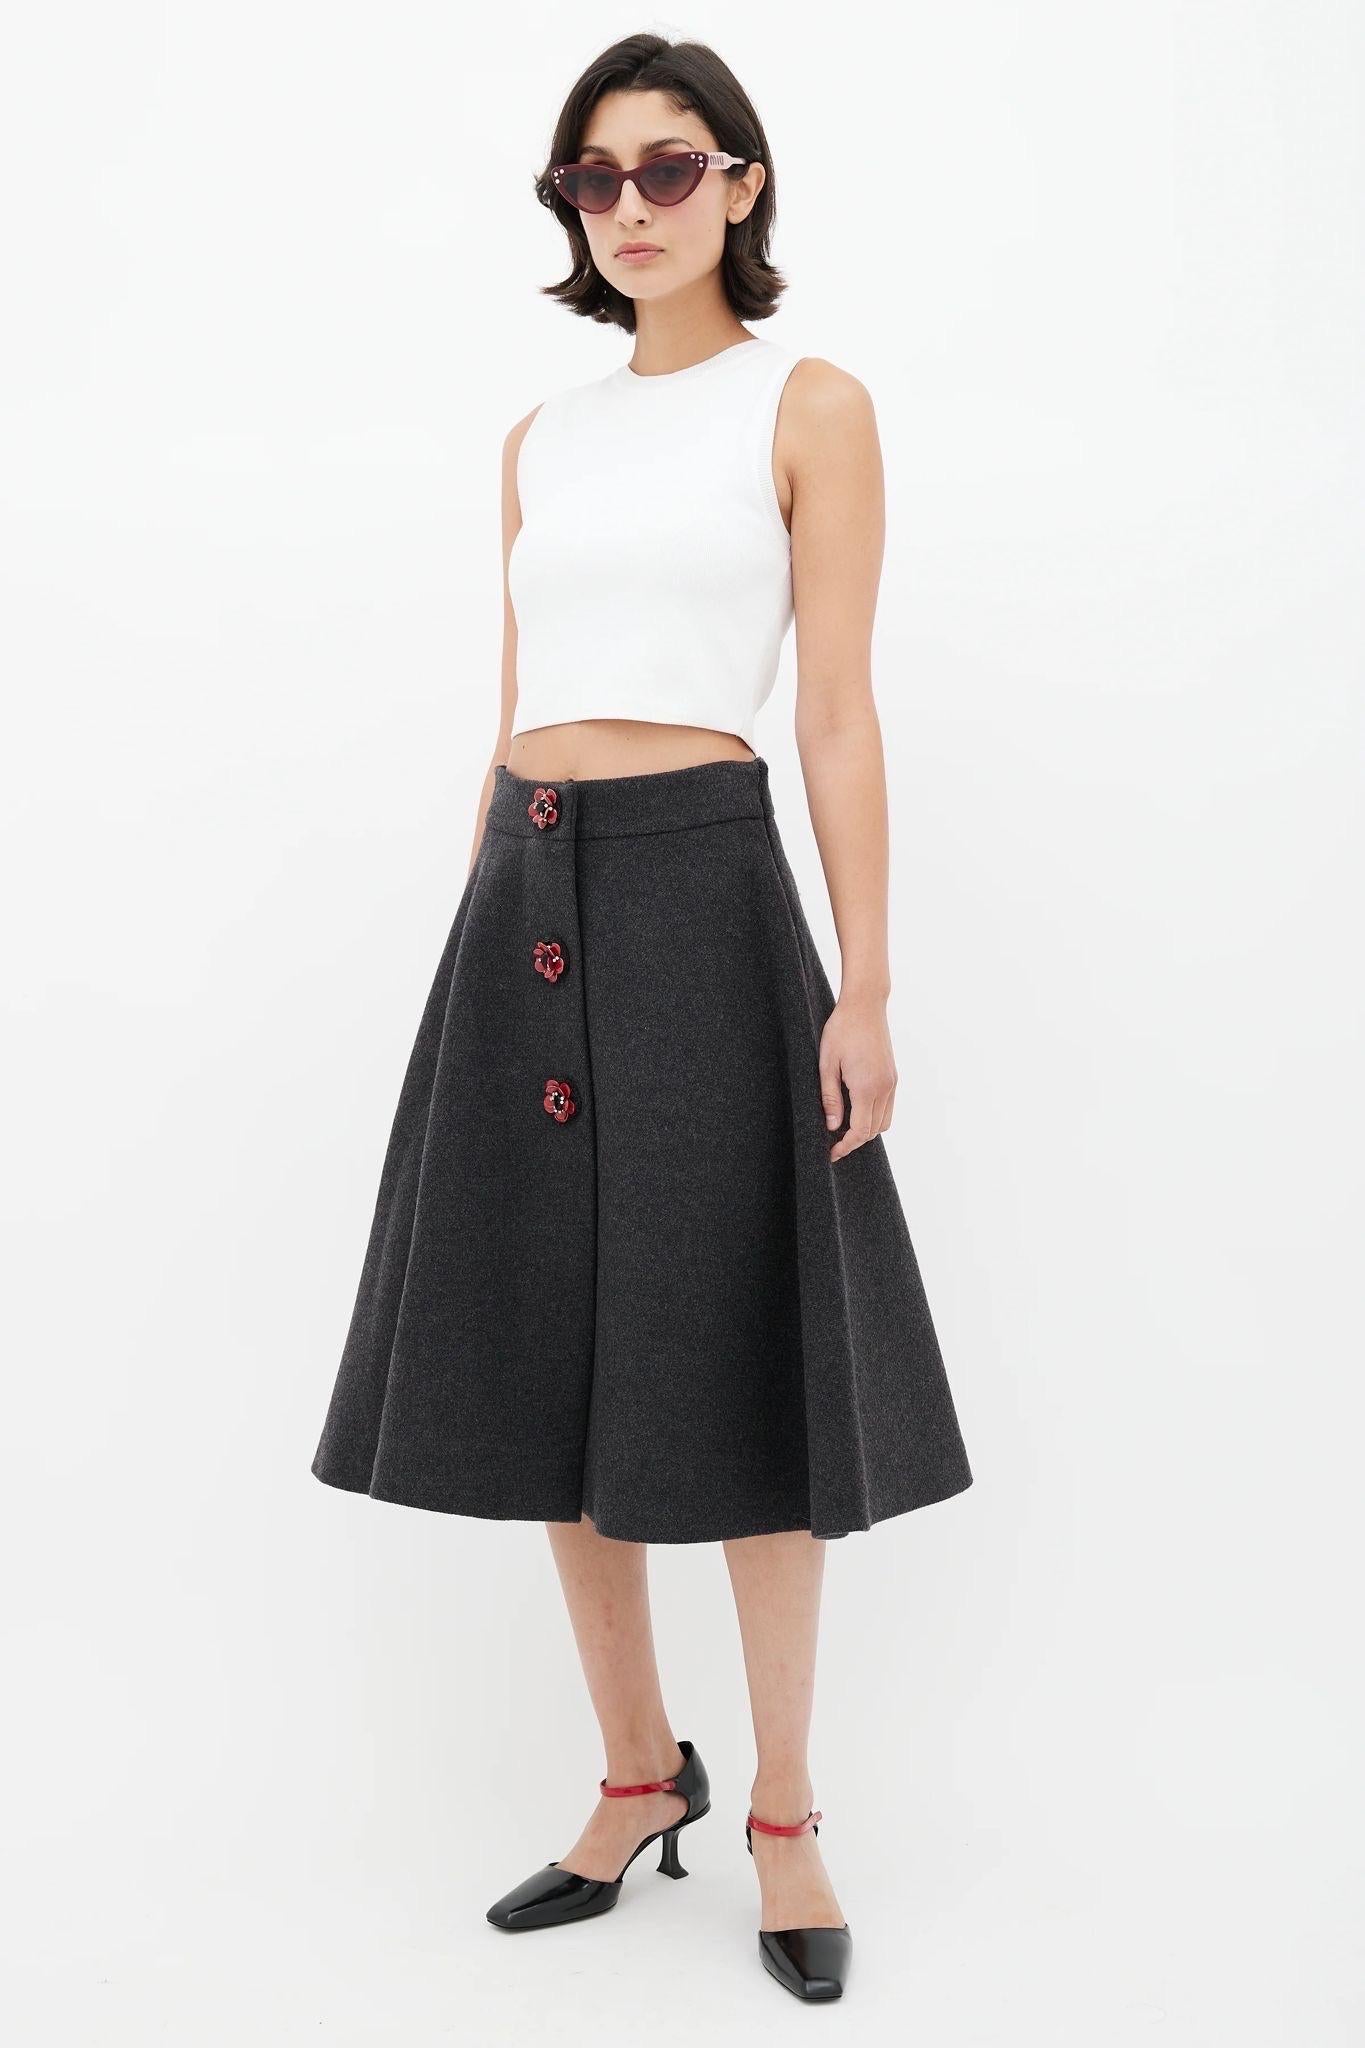 Miu Miu Skirt.
In grey wool , featuring amazing flower buttons.
Size 44 Italian 
Waist 37 cm
Hips 59 cm
Length 73 cm
Second hand piece but very good general condition.